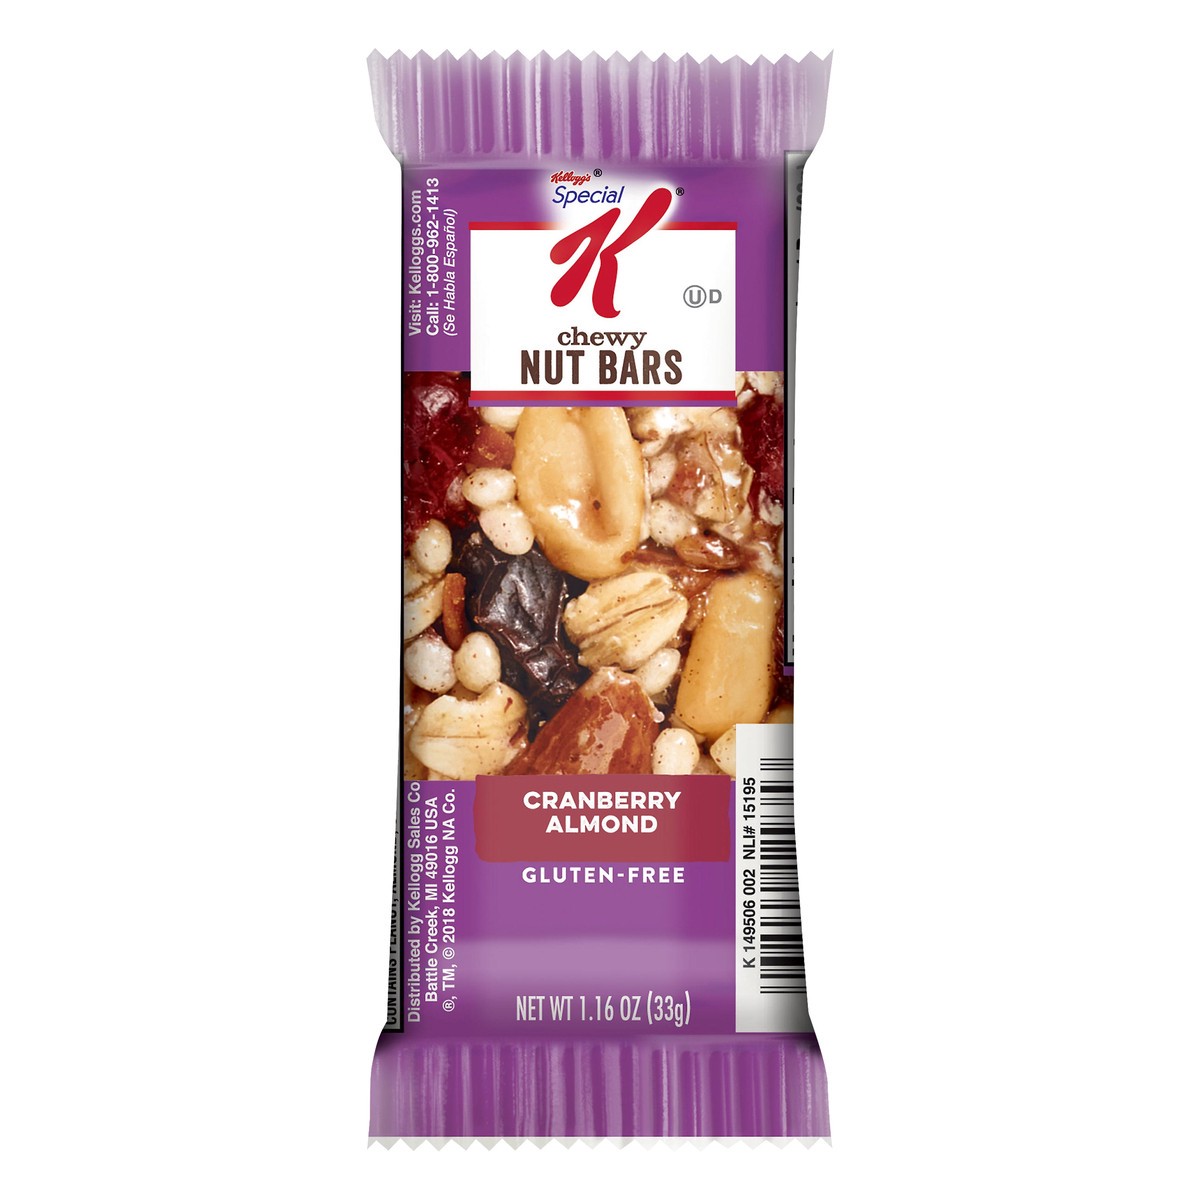 slide 7 of 7, Special K Kellogg's Special K Chewy Nut Bars, Cranberry Almond, 1.16 oz, 1.16 oz